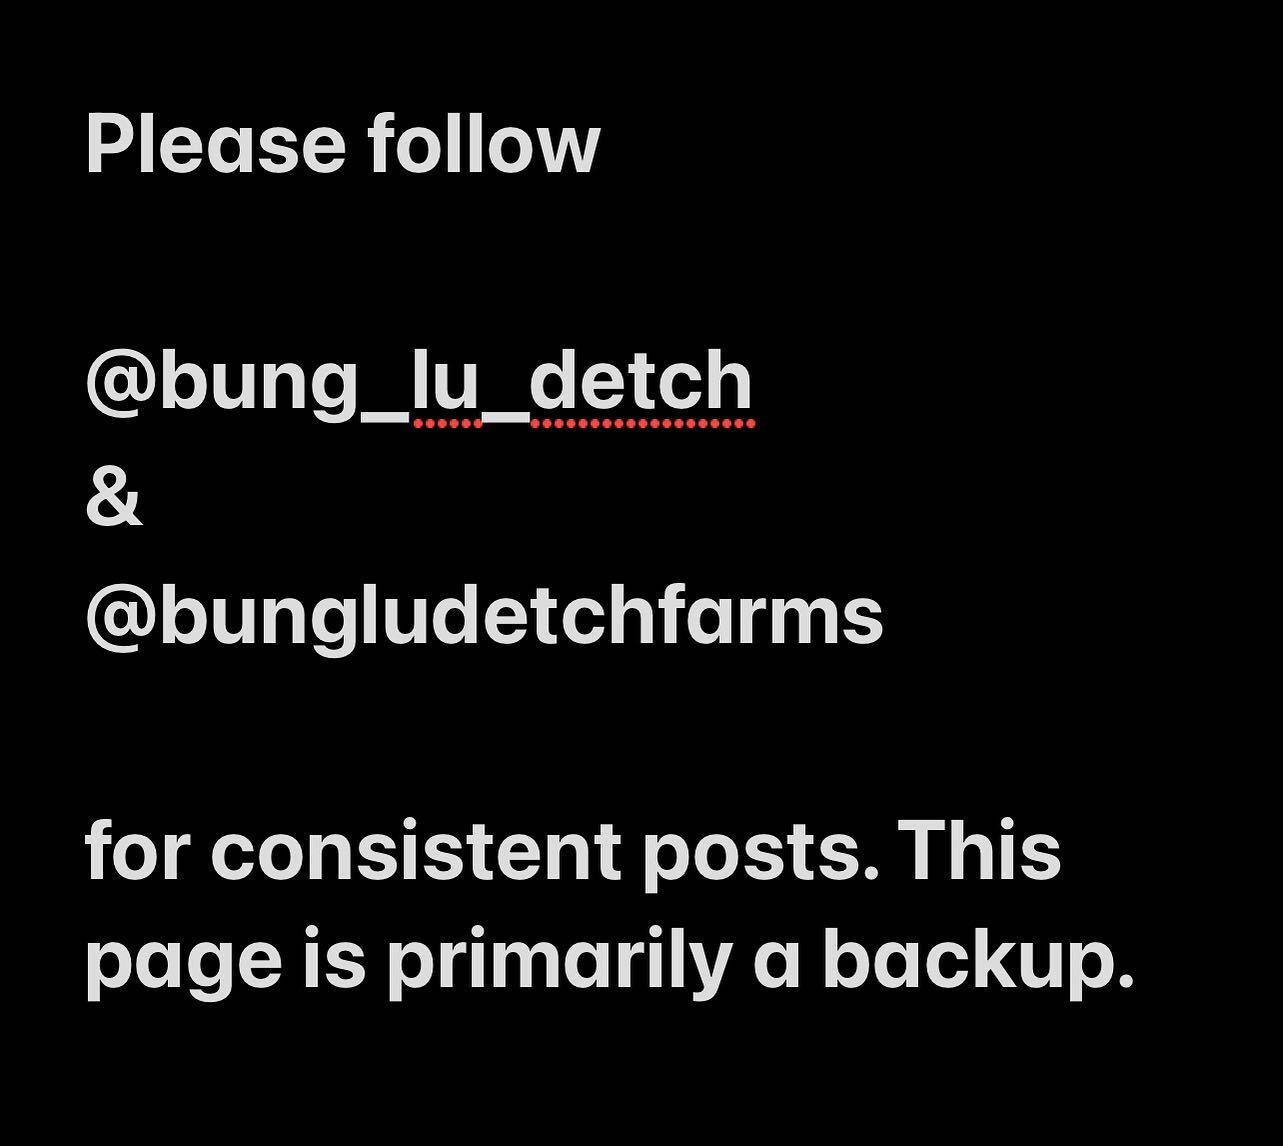 Please Follow @bung_lu_detch &amp; @bungludetchfarms  for consistent content! Much love yall!